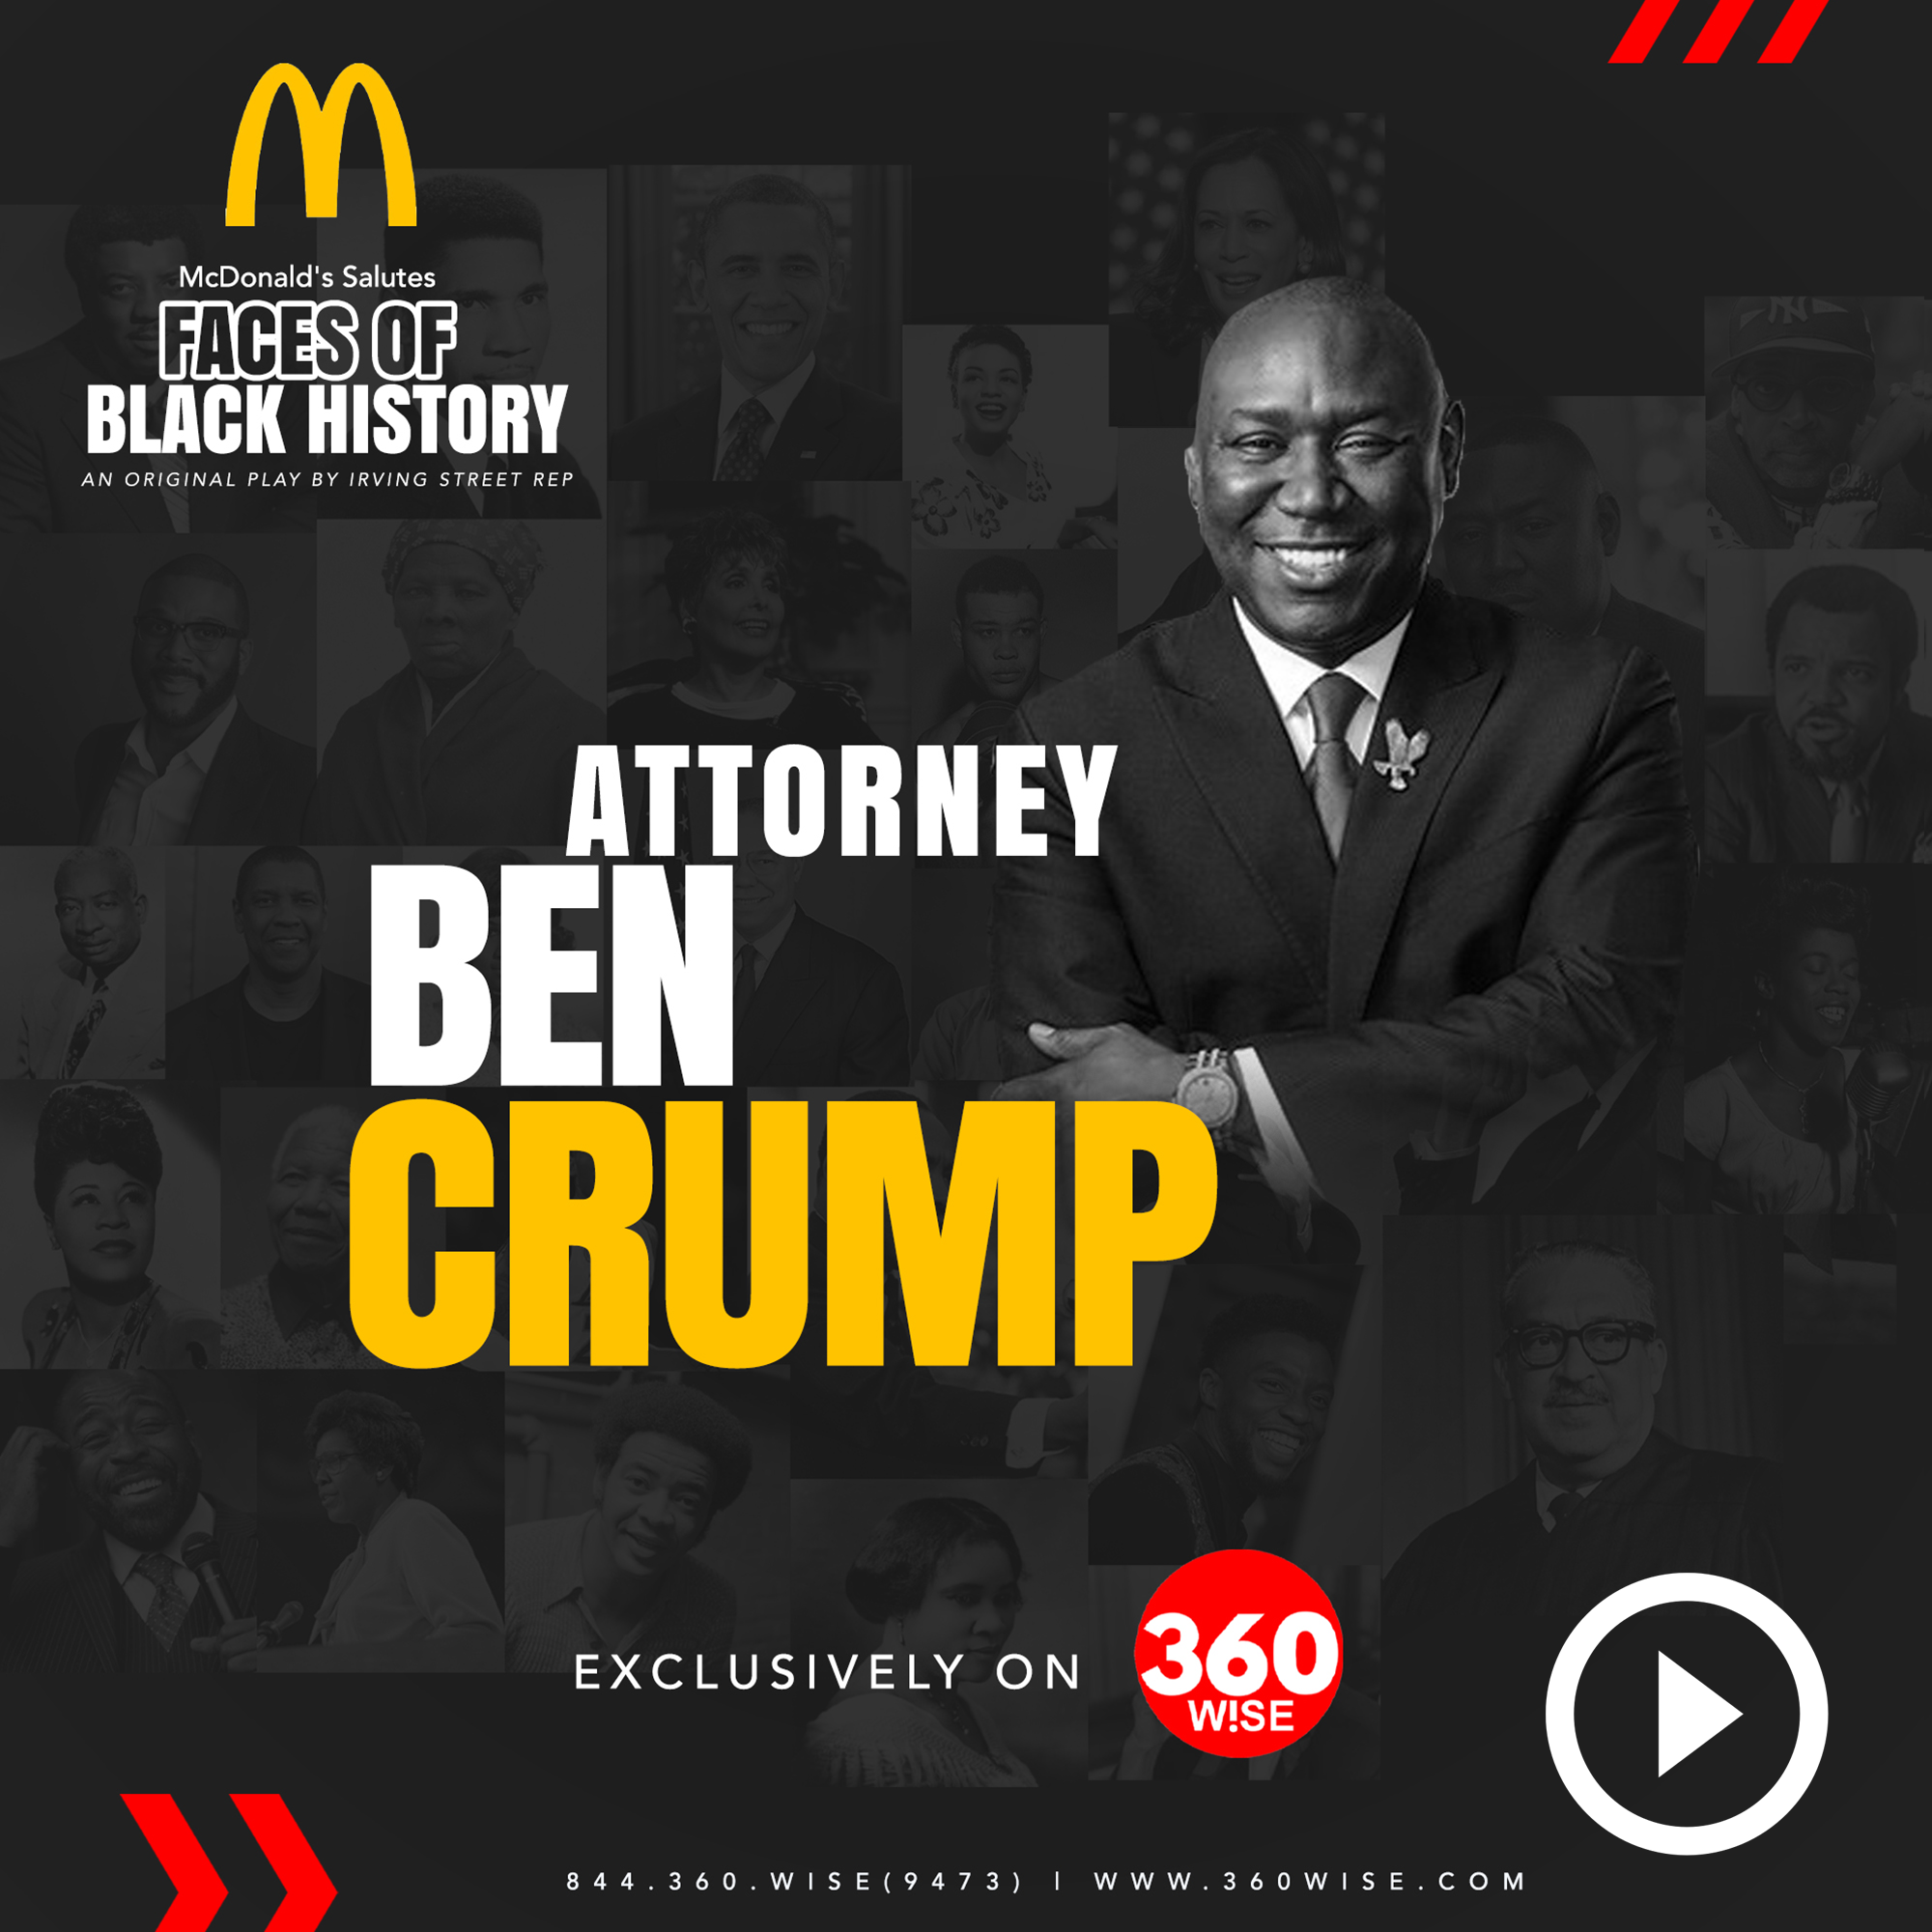 Experience the McDonald's Faces of Black History play, streaming on 360WiSE TV. Join us in celebrating Black excellence and the achievements of influential individuals in our community.